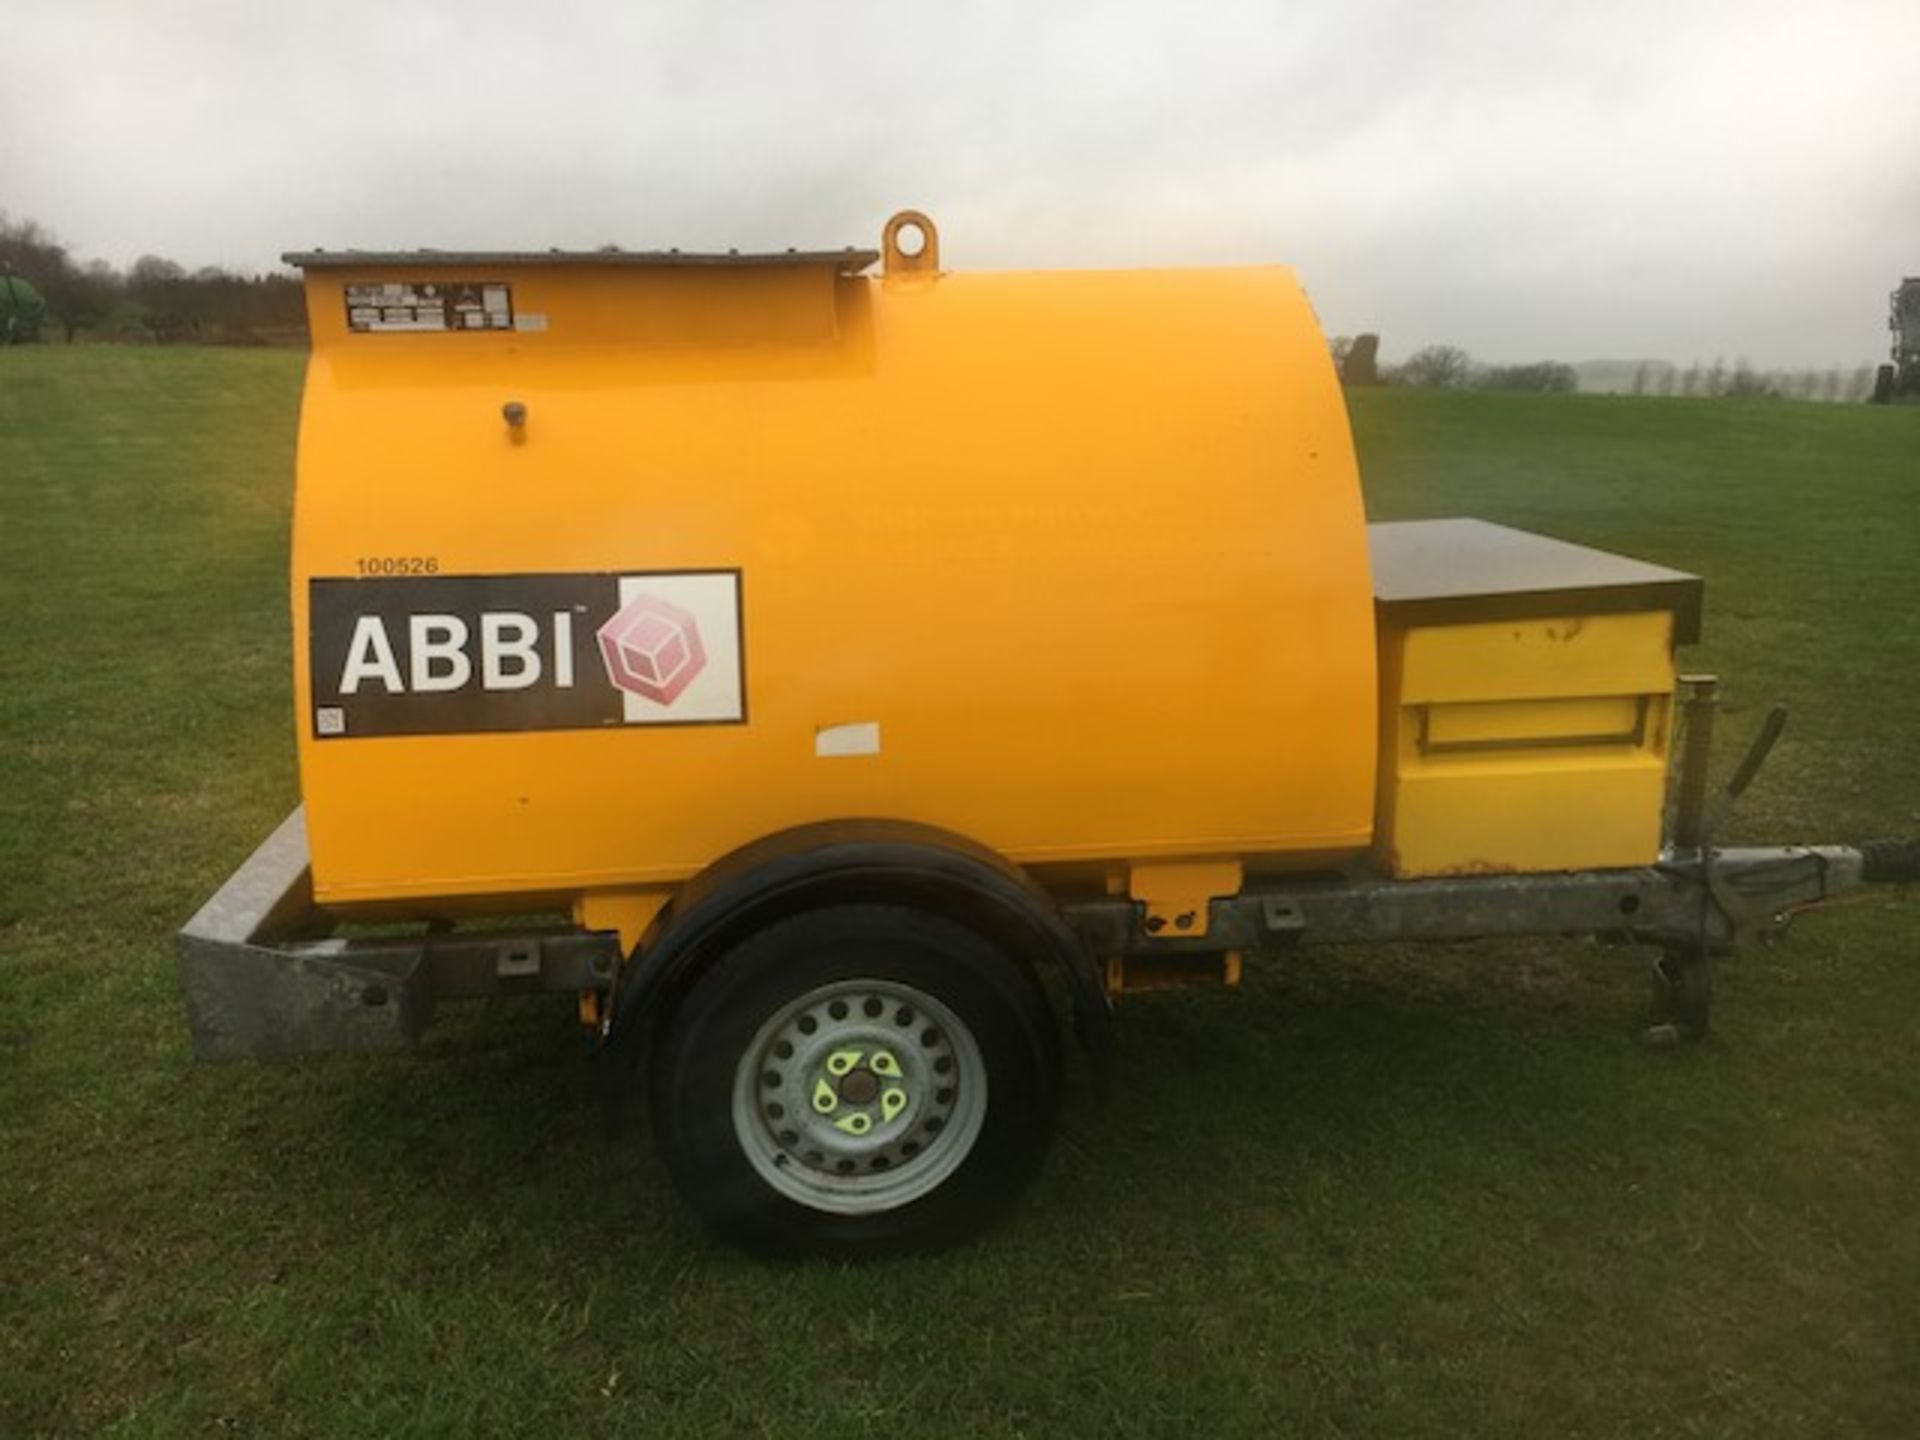 WESTERN ABBI FUEL BOWSER - Image 3 of 3